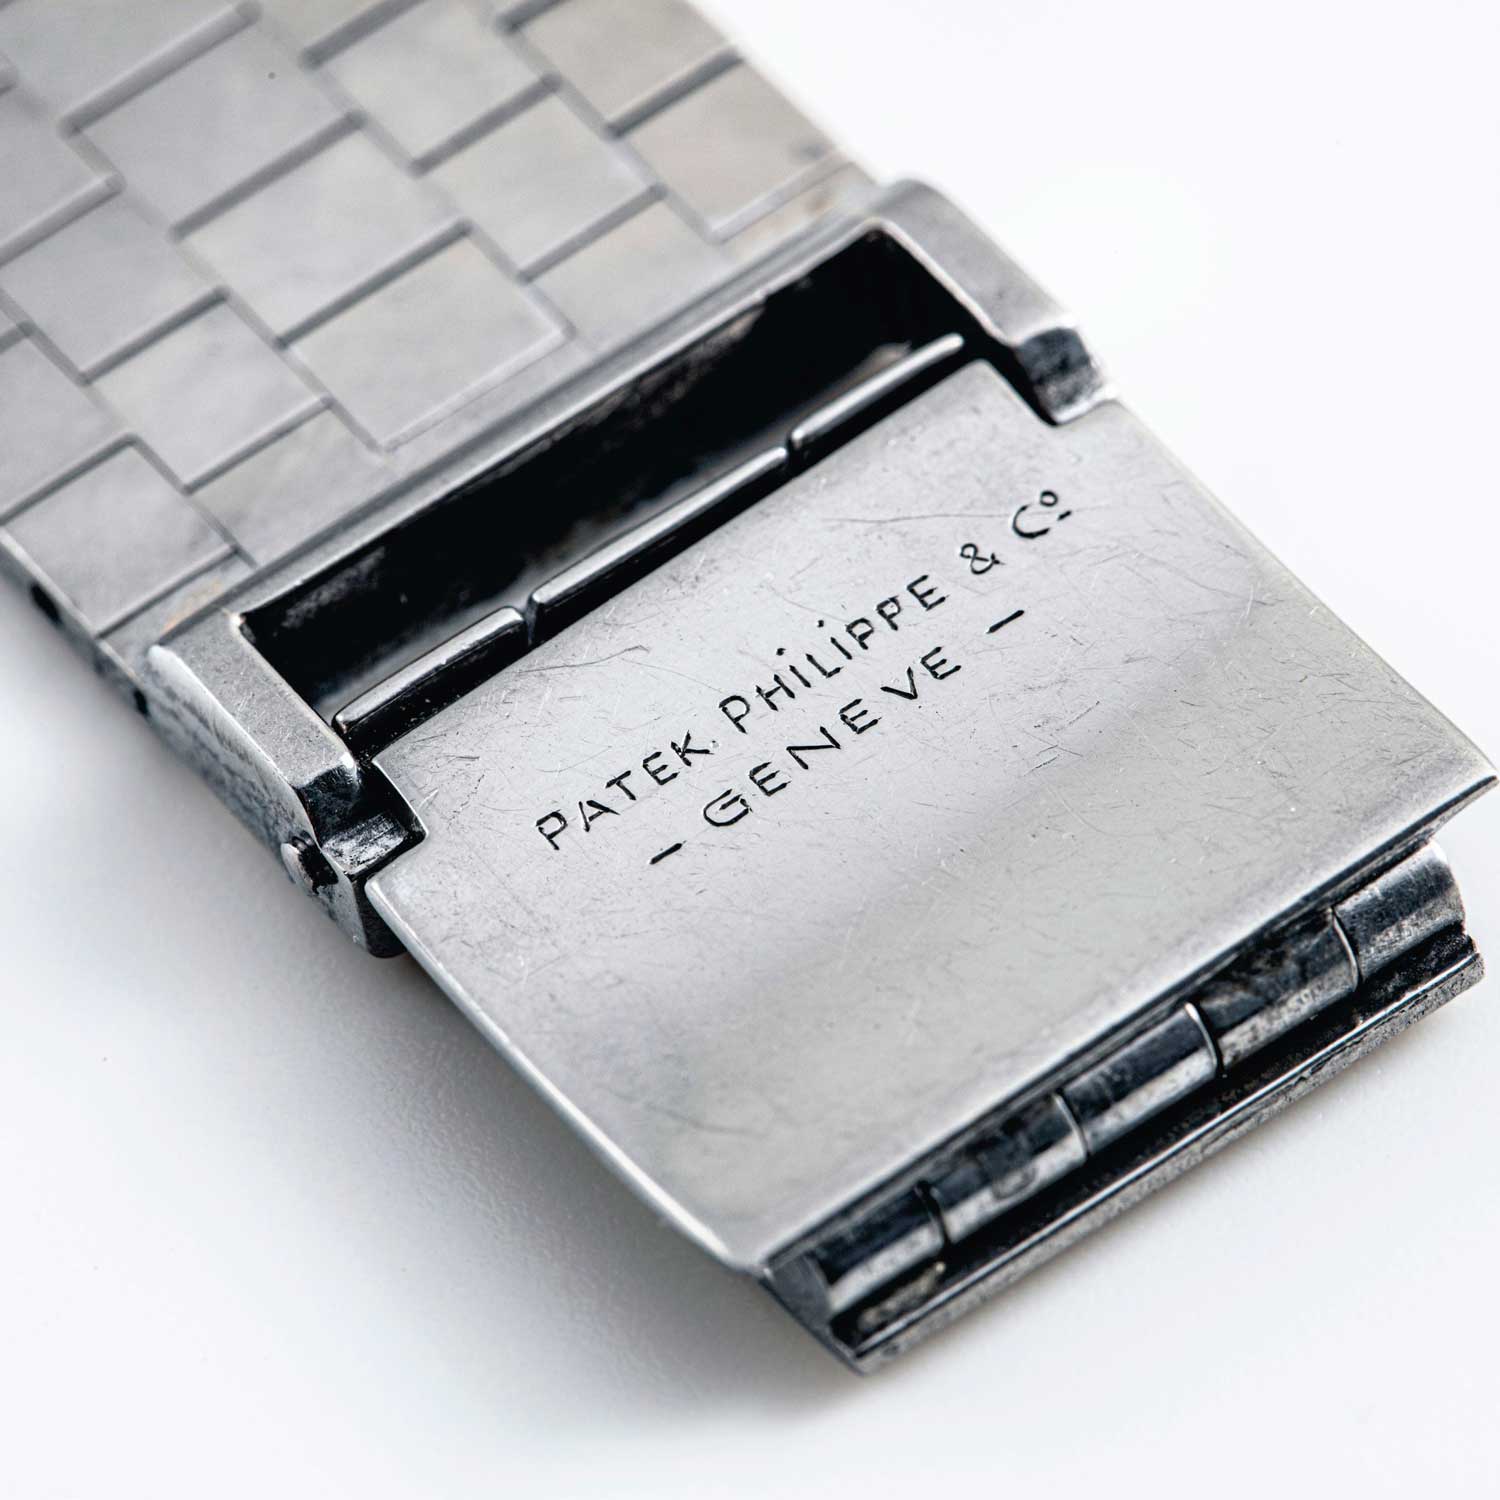 Lot 2481: Patek Philippe Platinum Calatrava with Diamond Hour Markers and 18k White Gold Bracelet, Ref. 2484, Confirmed by the extract from The Archives